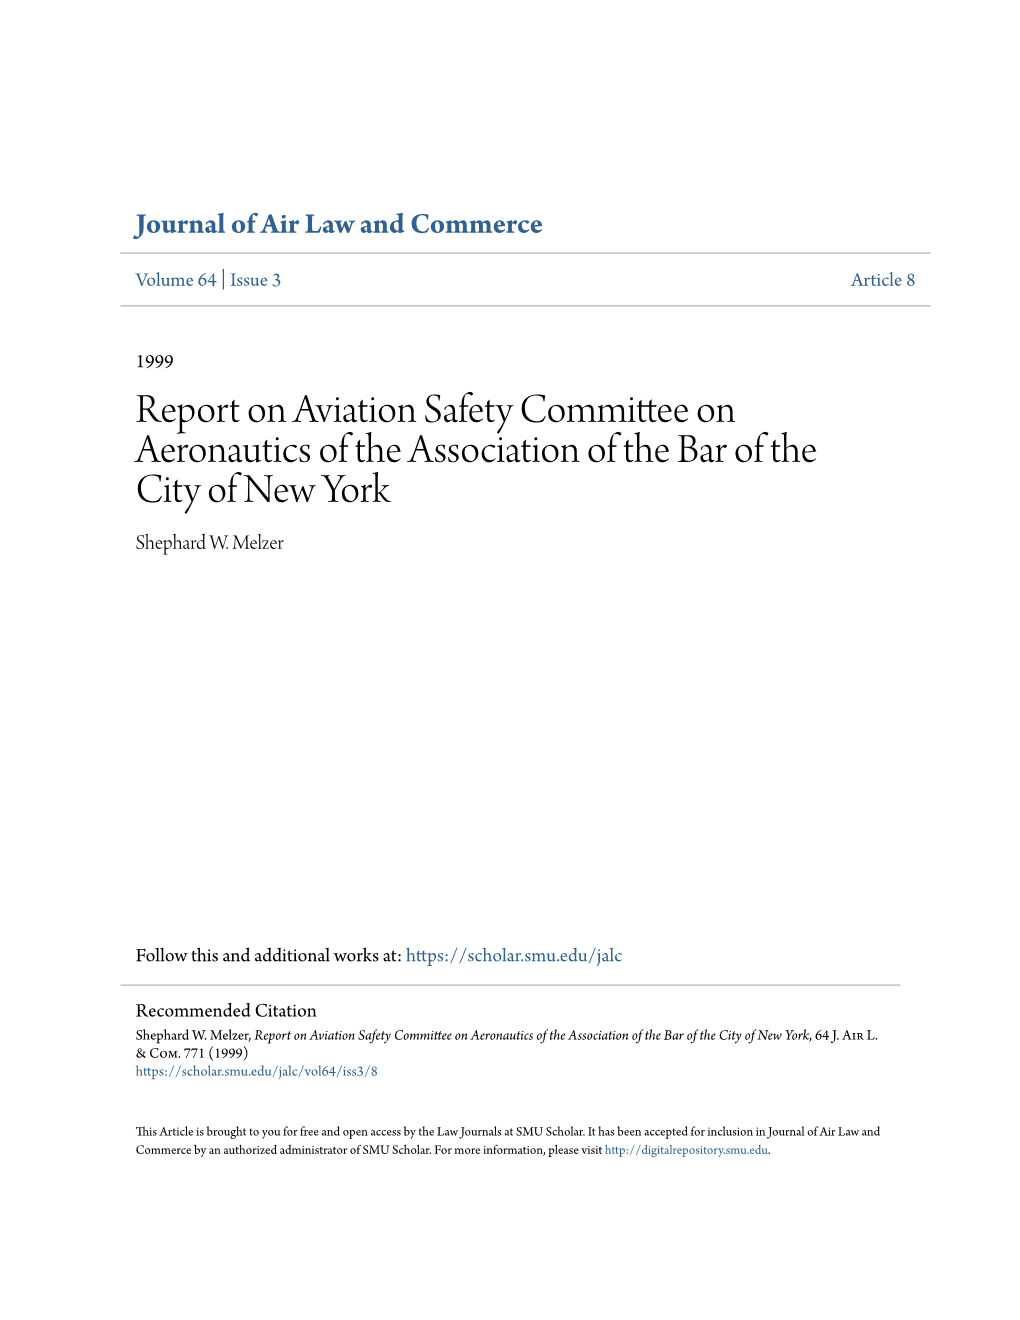 Report on Aviation Safety Committee on Aeronautics of the Association of the Bar of the City of New York Shephard W